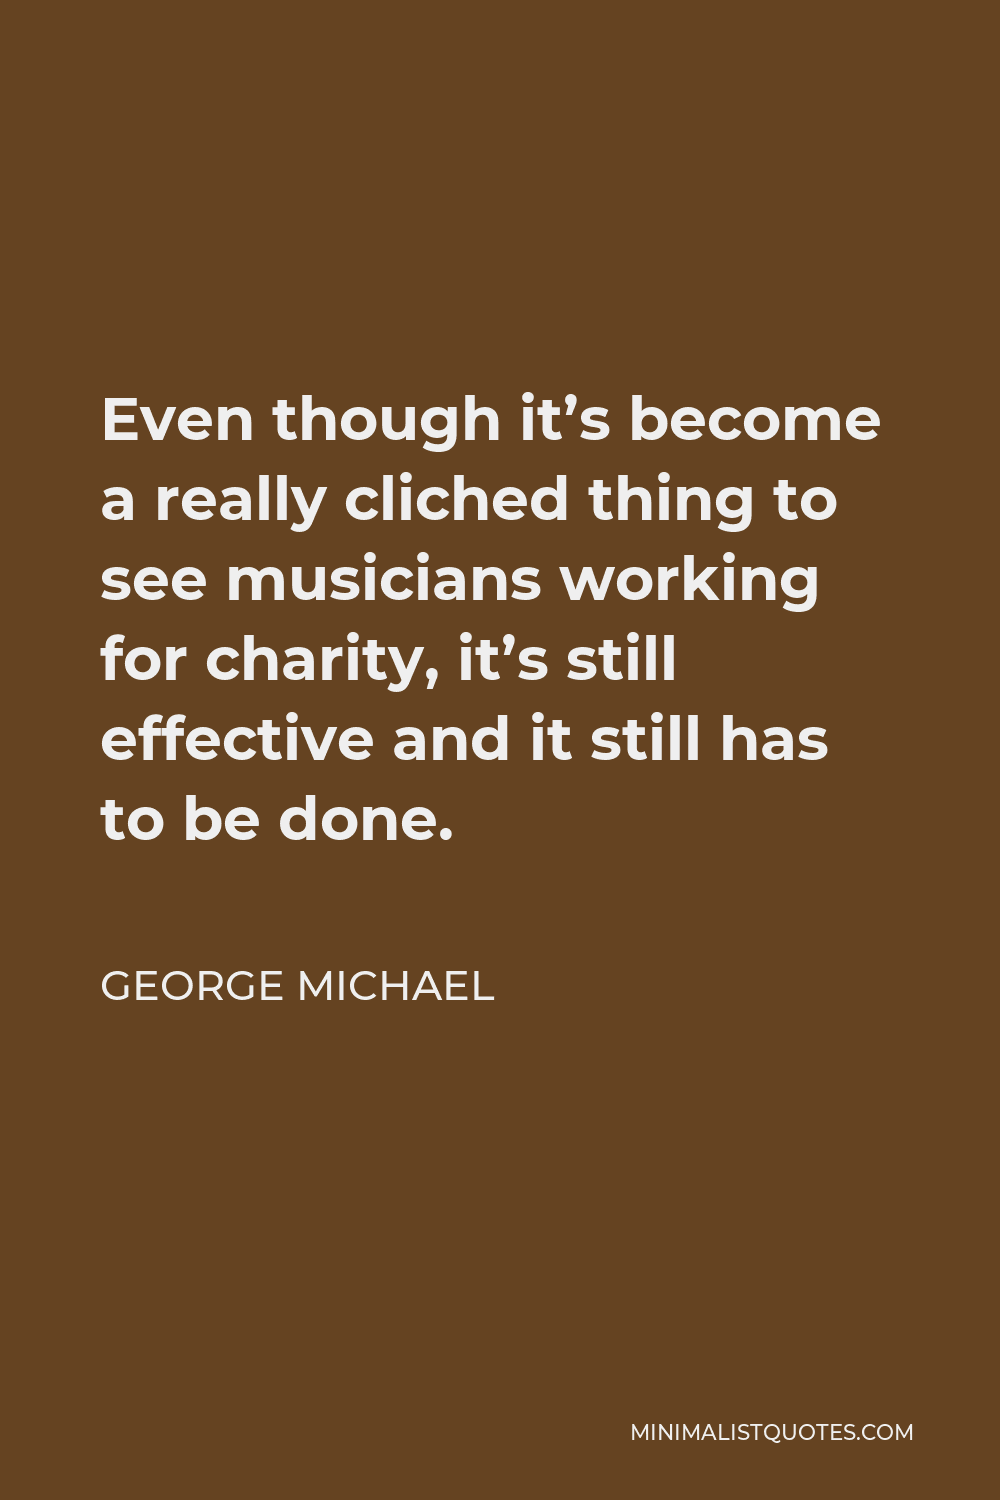 George Michael Quote - Even though it’s become a really cliched thing to see musicians working for charity, it’s still effective and it still has to be done.